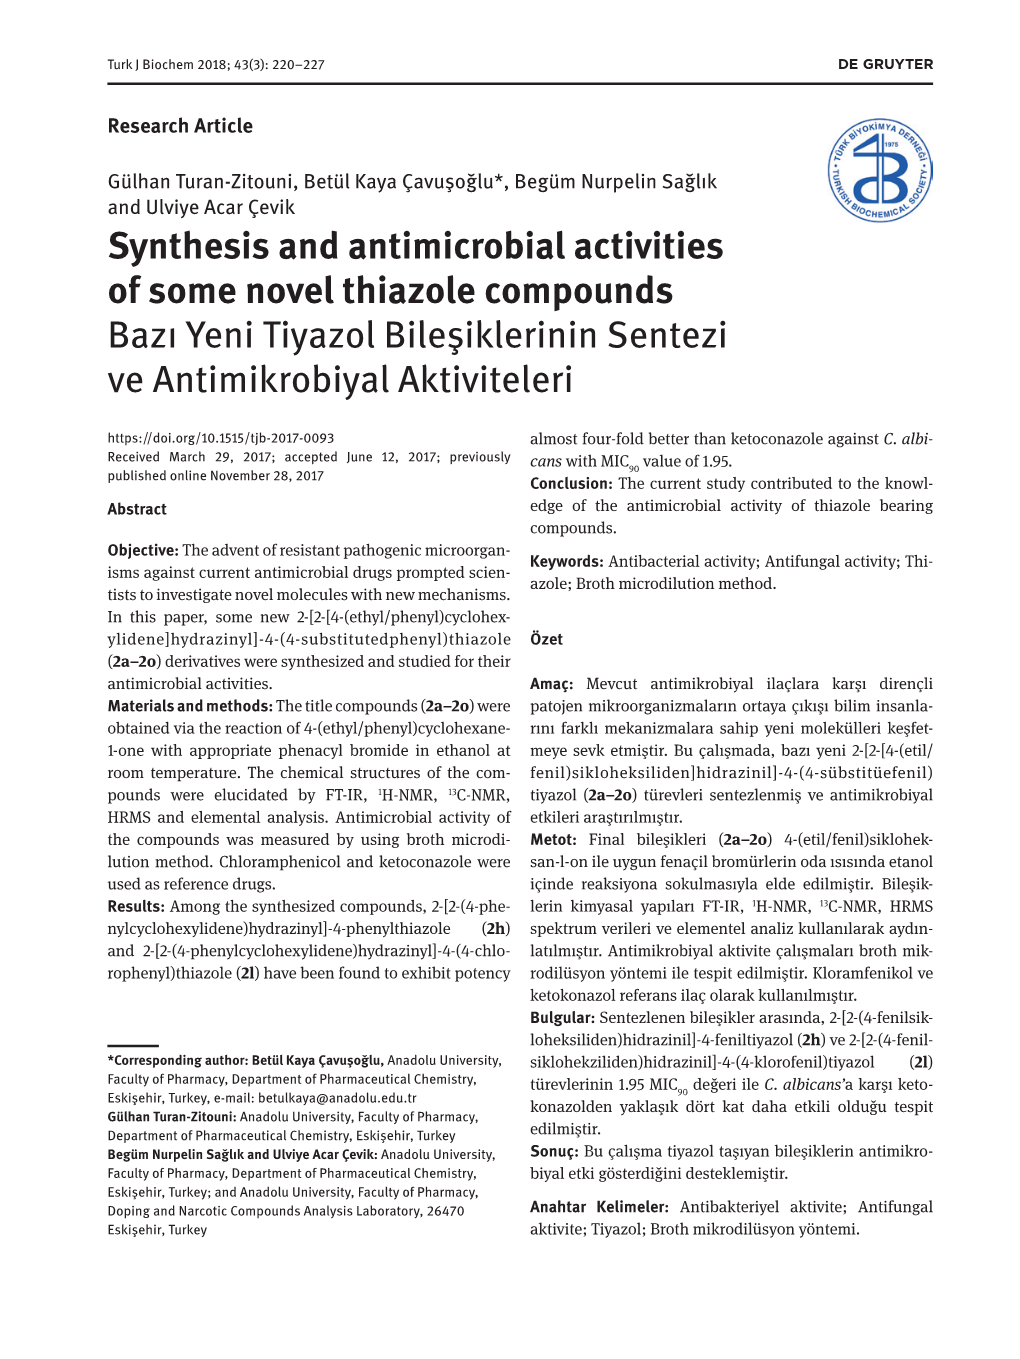 Synthesis and Antimicrobial Activities of Some Novel Thiazole Compounds